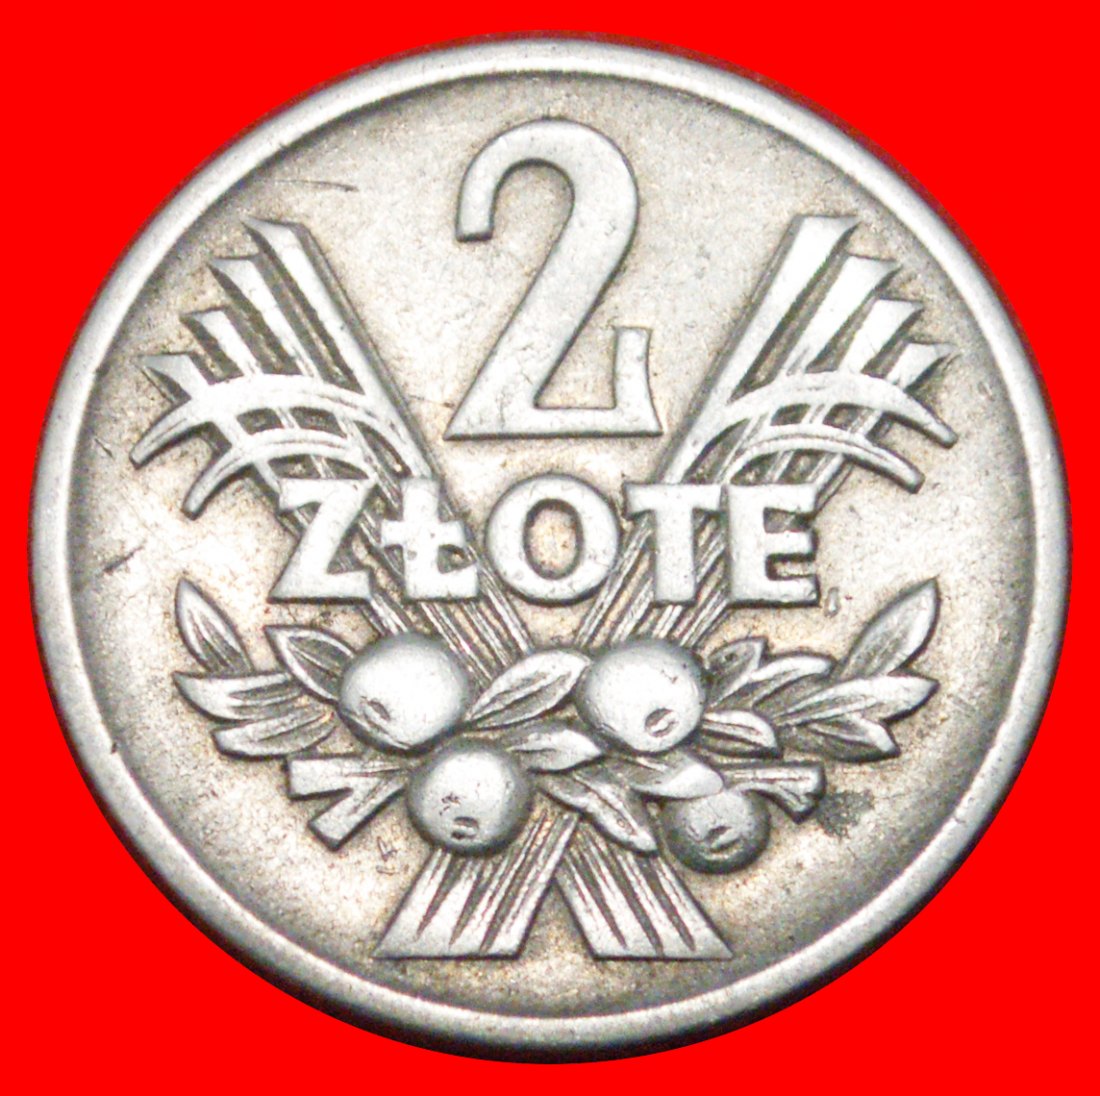  * FRUITS (1958-1974): POLAND ★ 2 ZLOTYS 1959 UNCOMMON!★LOW START ★ NO RESERVE!   